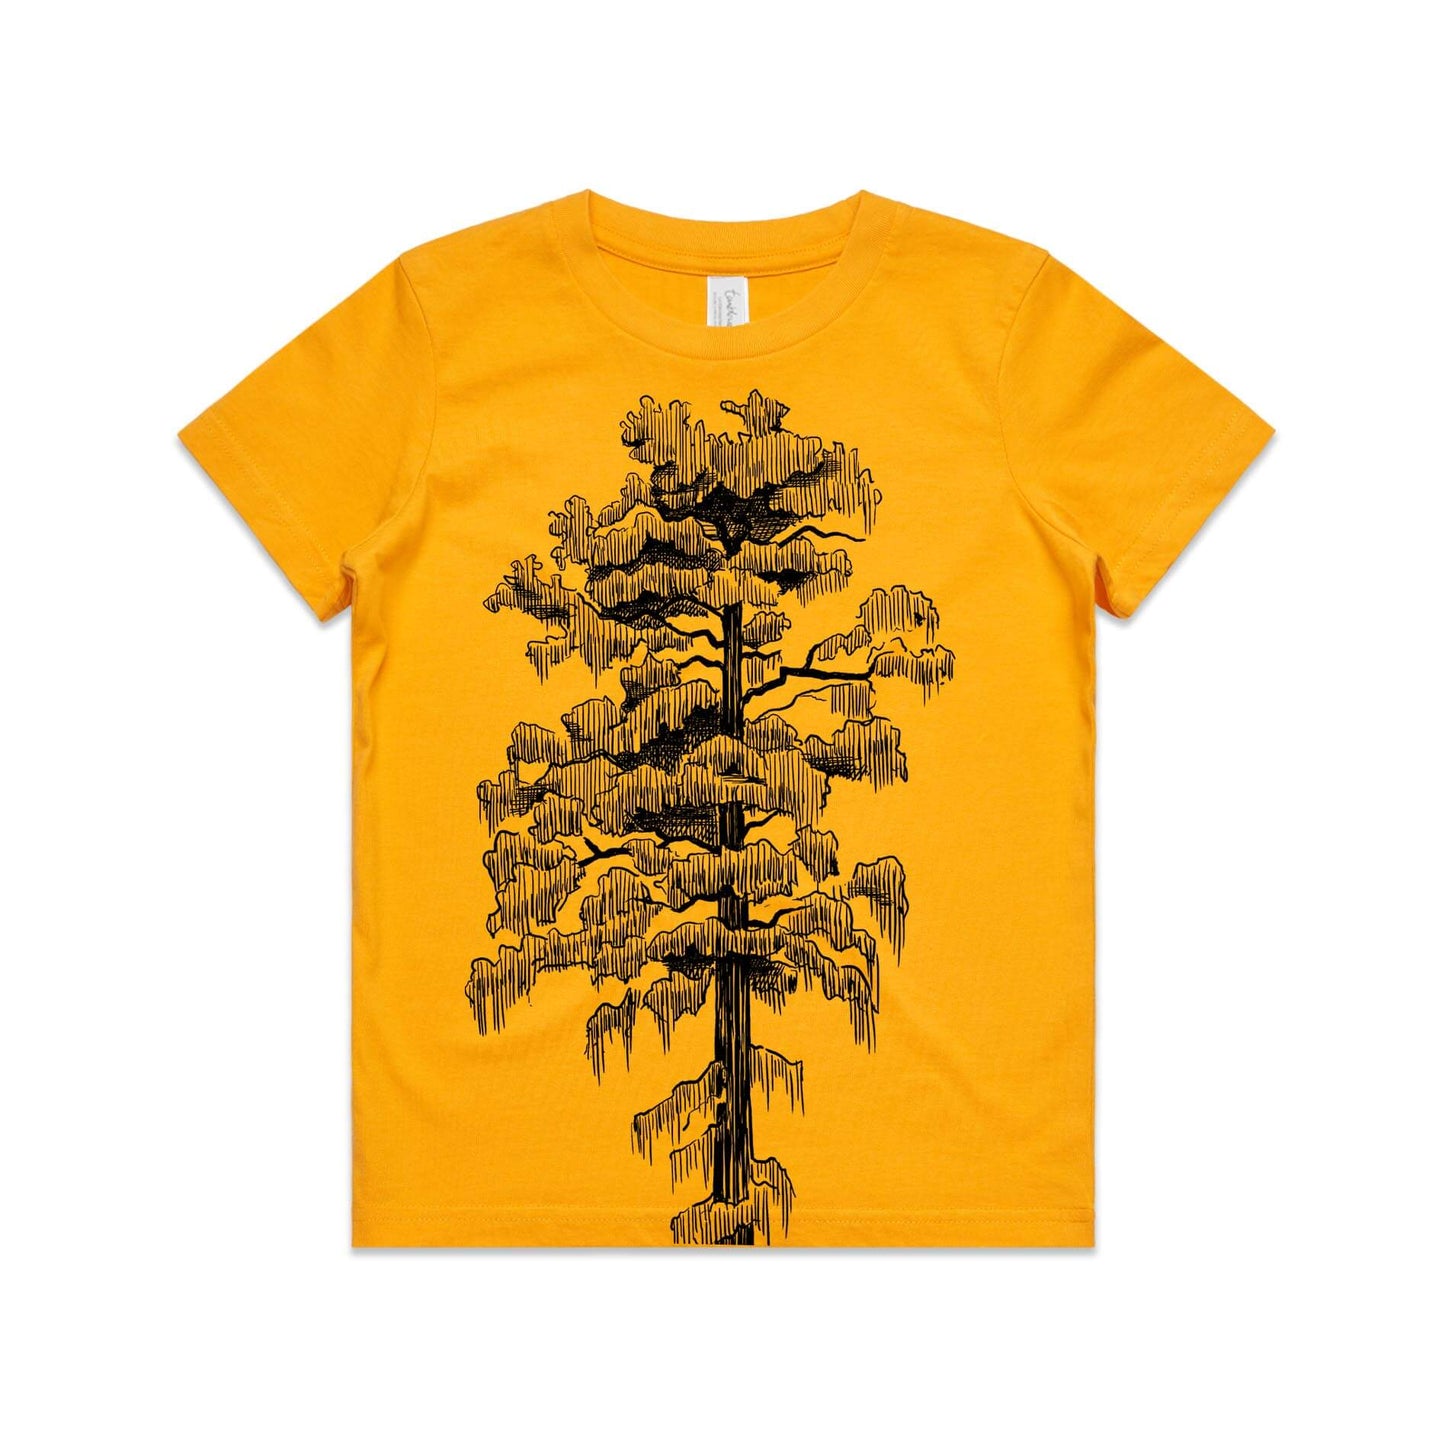 Gold, cotton kids' t-shirt with screen printed rimu design.